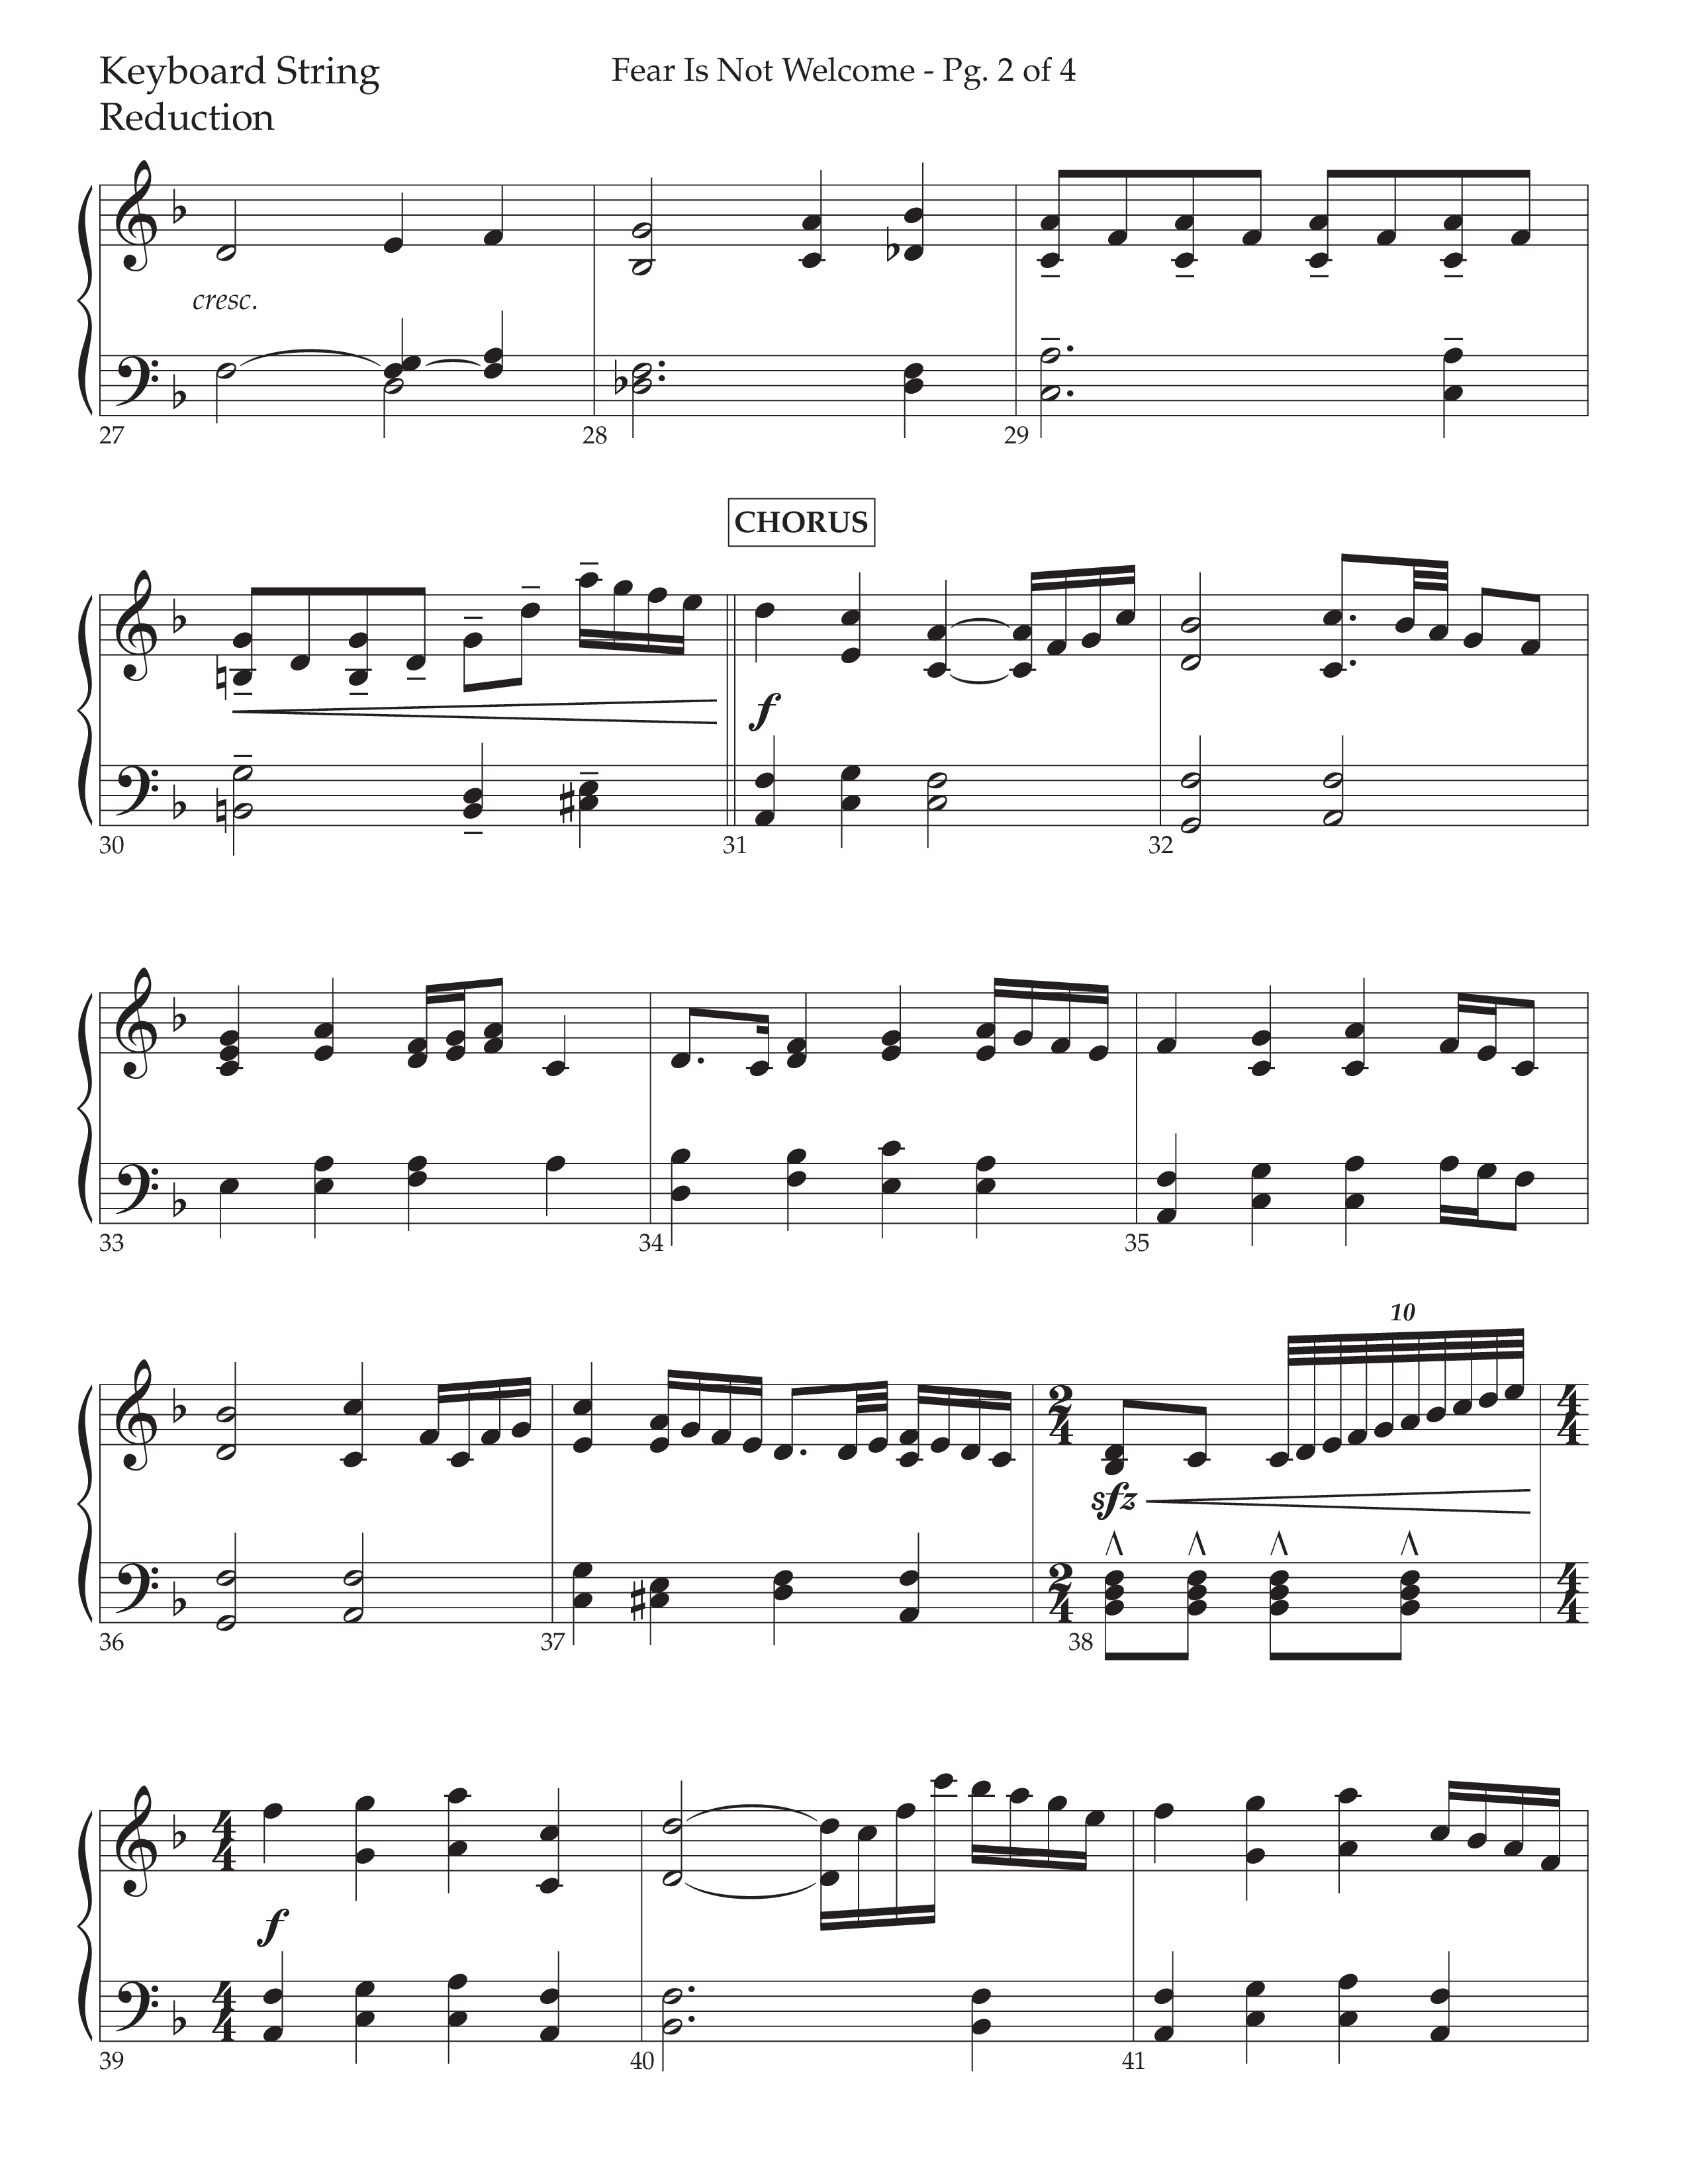 Fear Is Not Welcome (Choral Anthem SATB) String Reduction (Lifeway Choral / Arr. Cliff Duren)